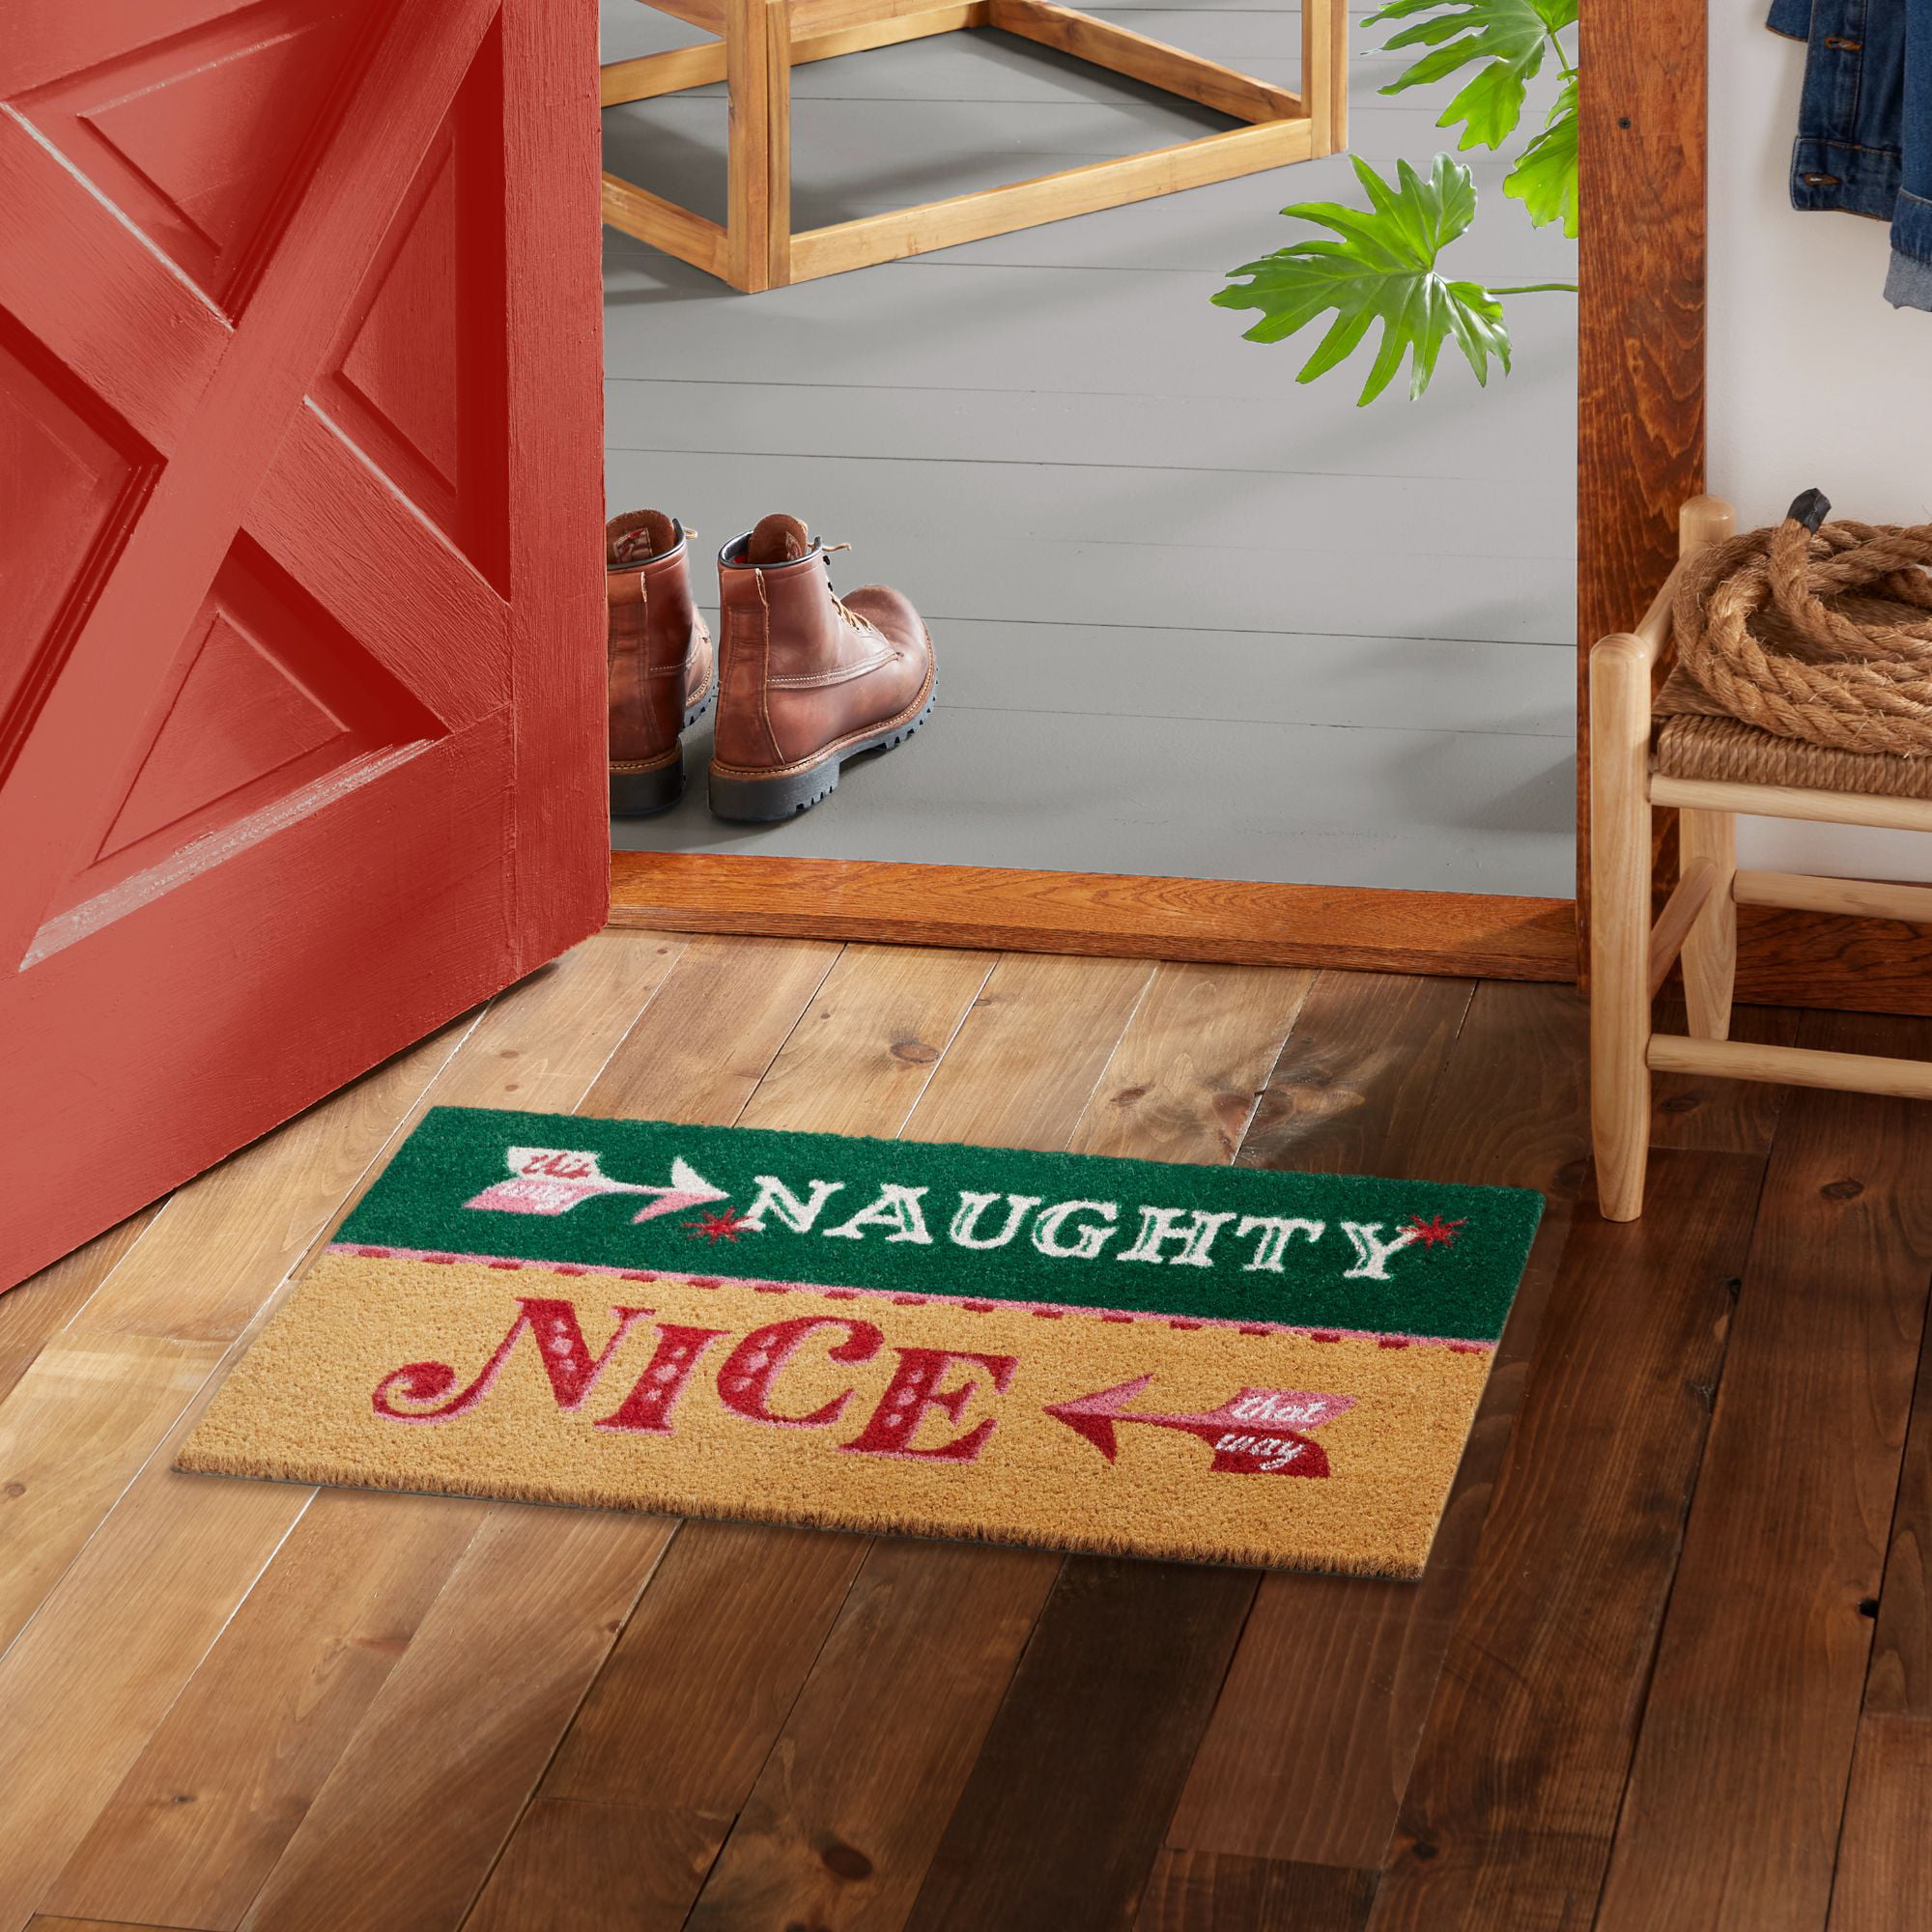 Are Your Floors Naughty or Nice - Flooring